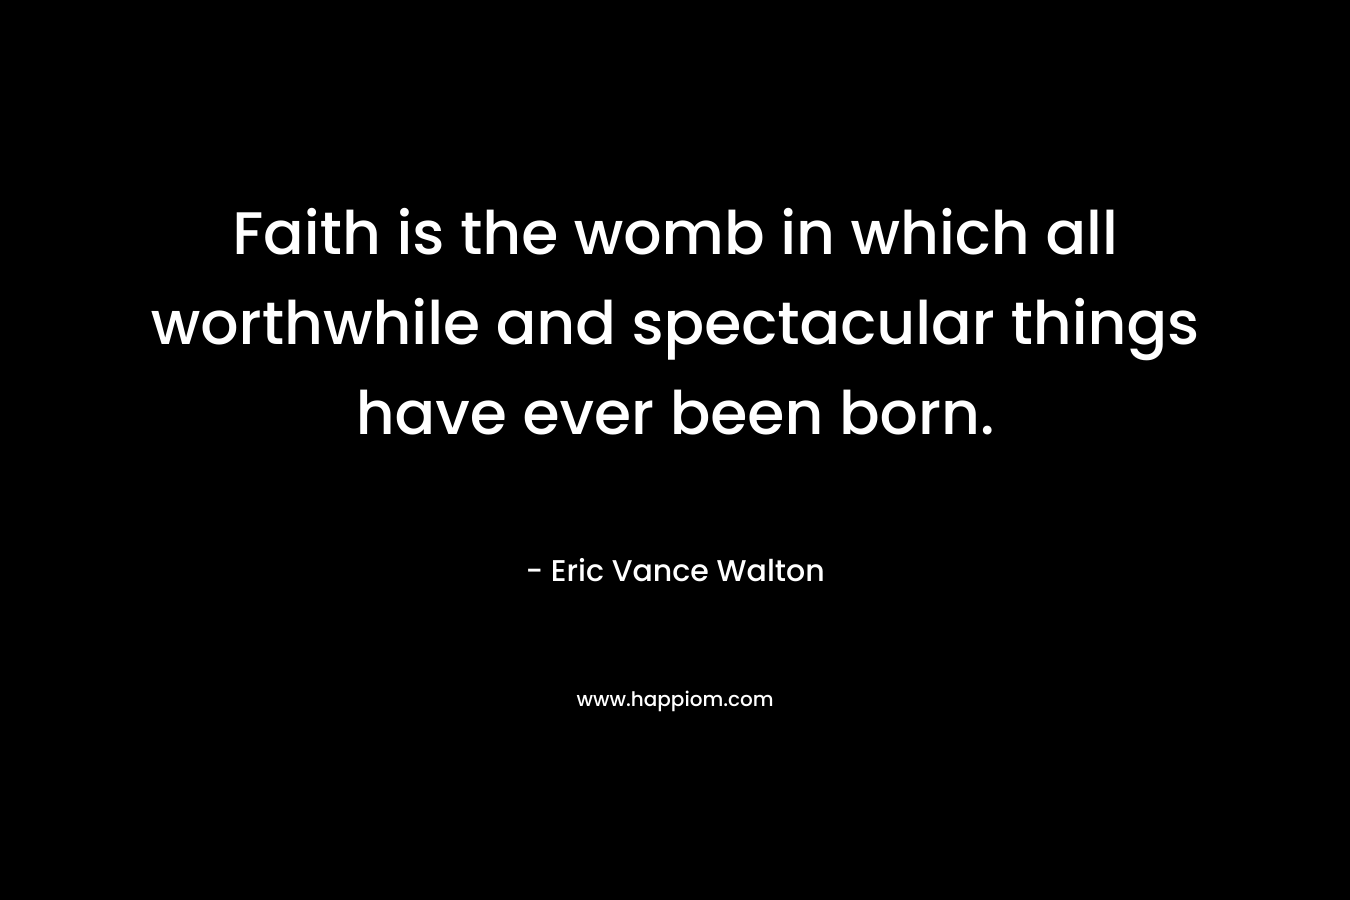 Faith is the womb in which all worthwhile and spectacular things have ever been born.